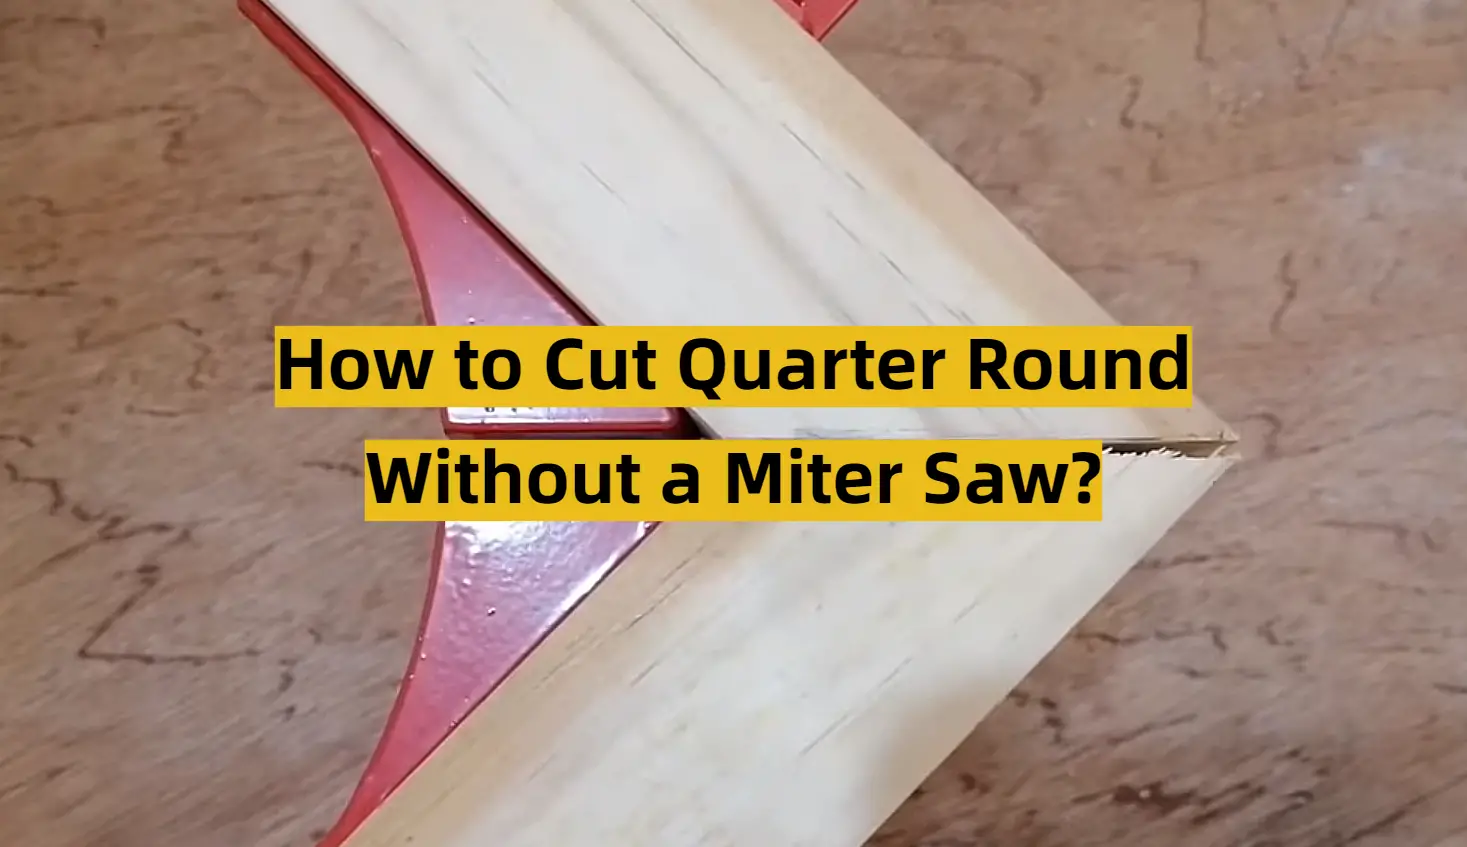 How to Cut Quarter Round Without a Miter Saw?